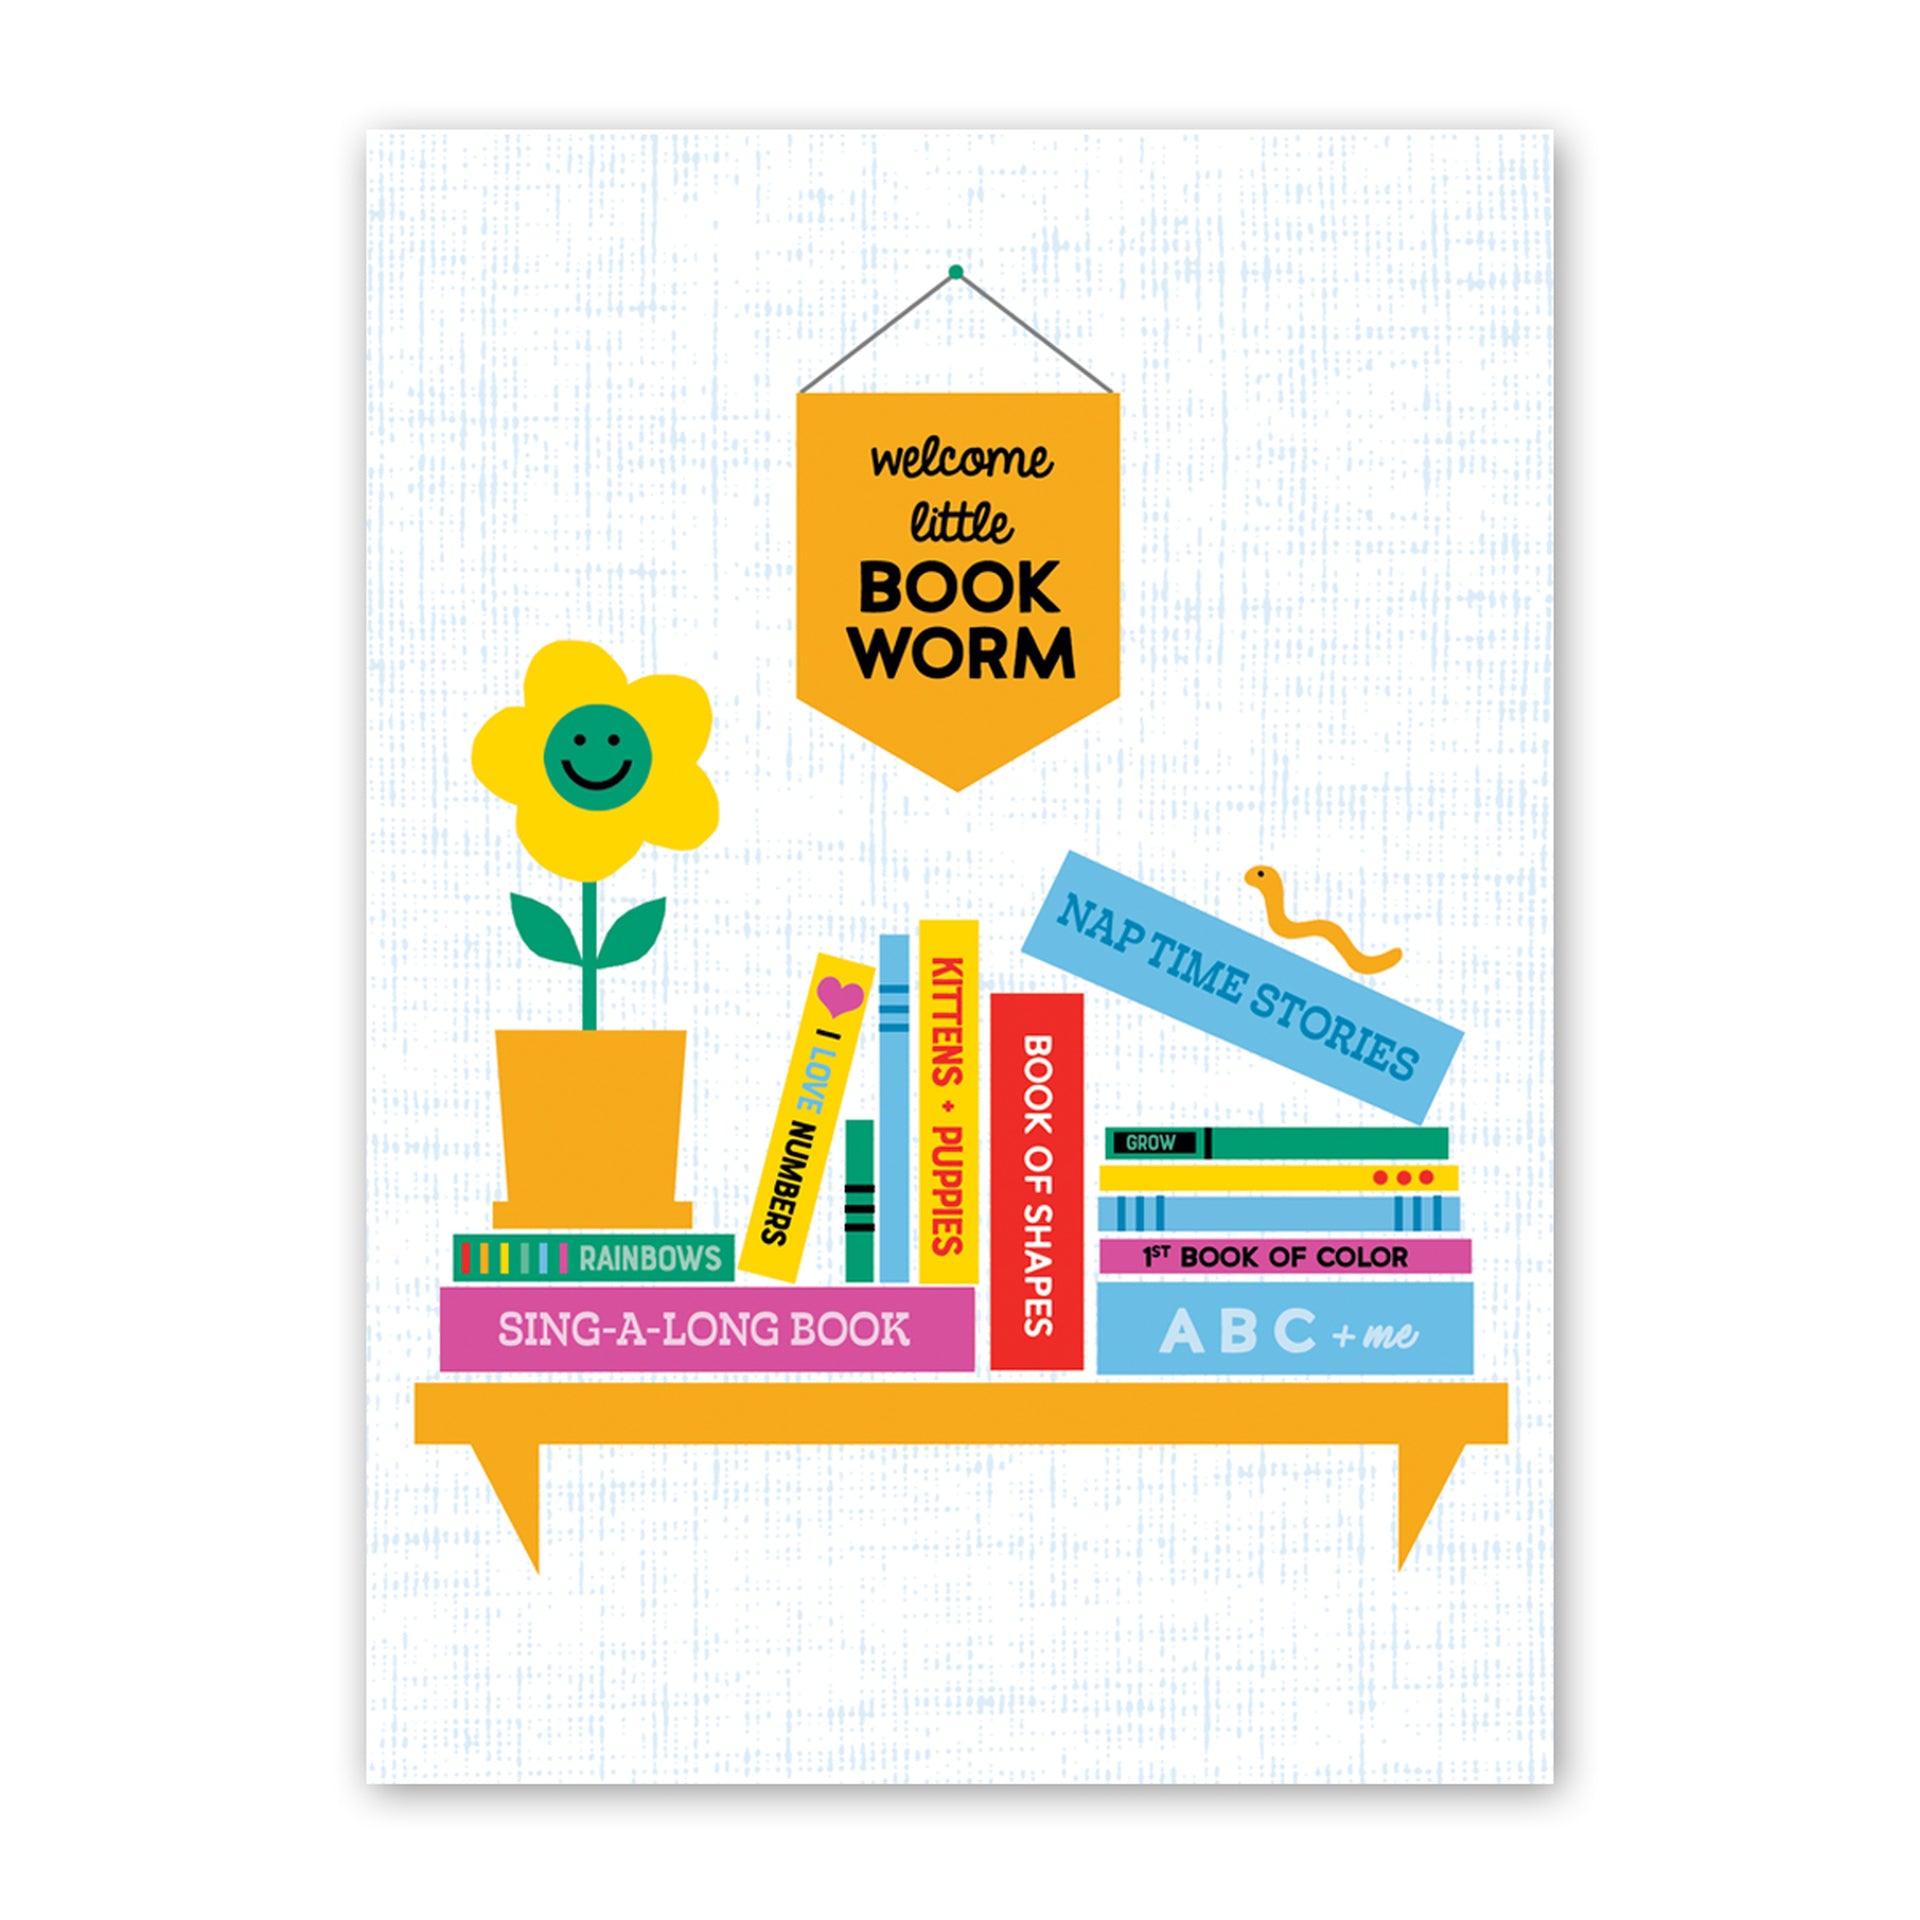 welcome little book worm greeting card